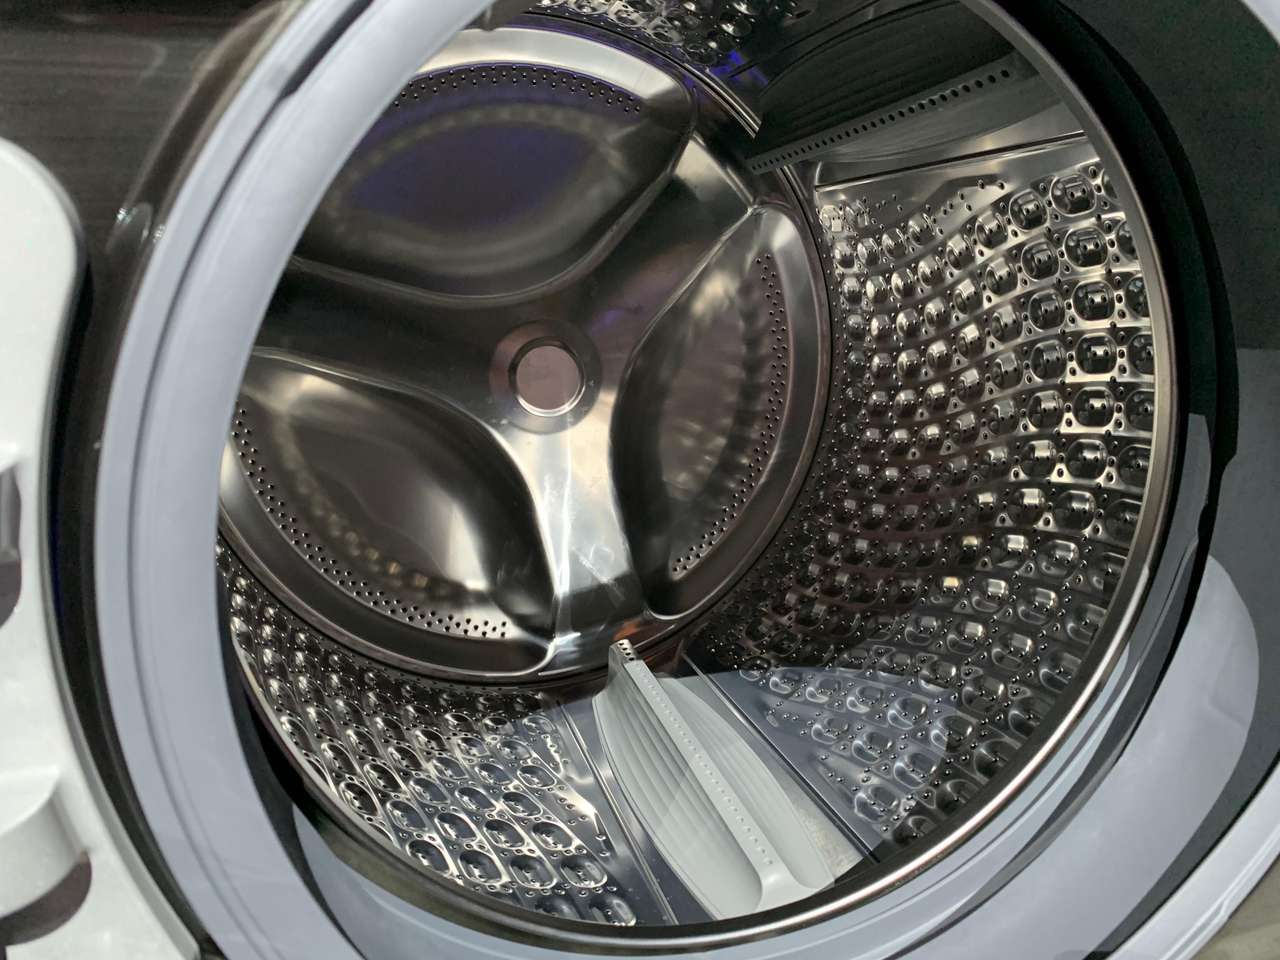 washing machine puzzle online from photo